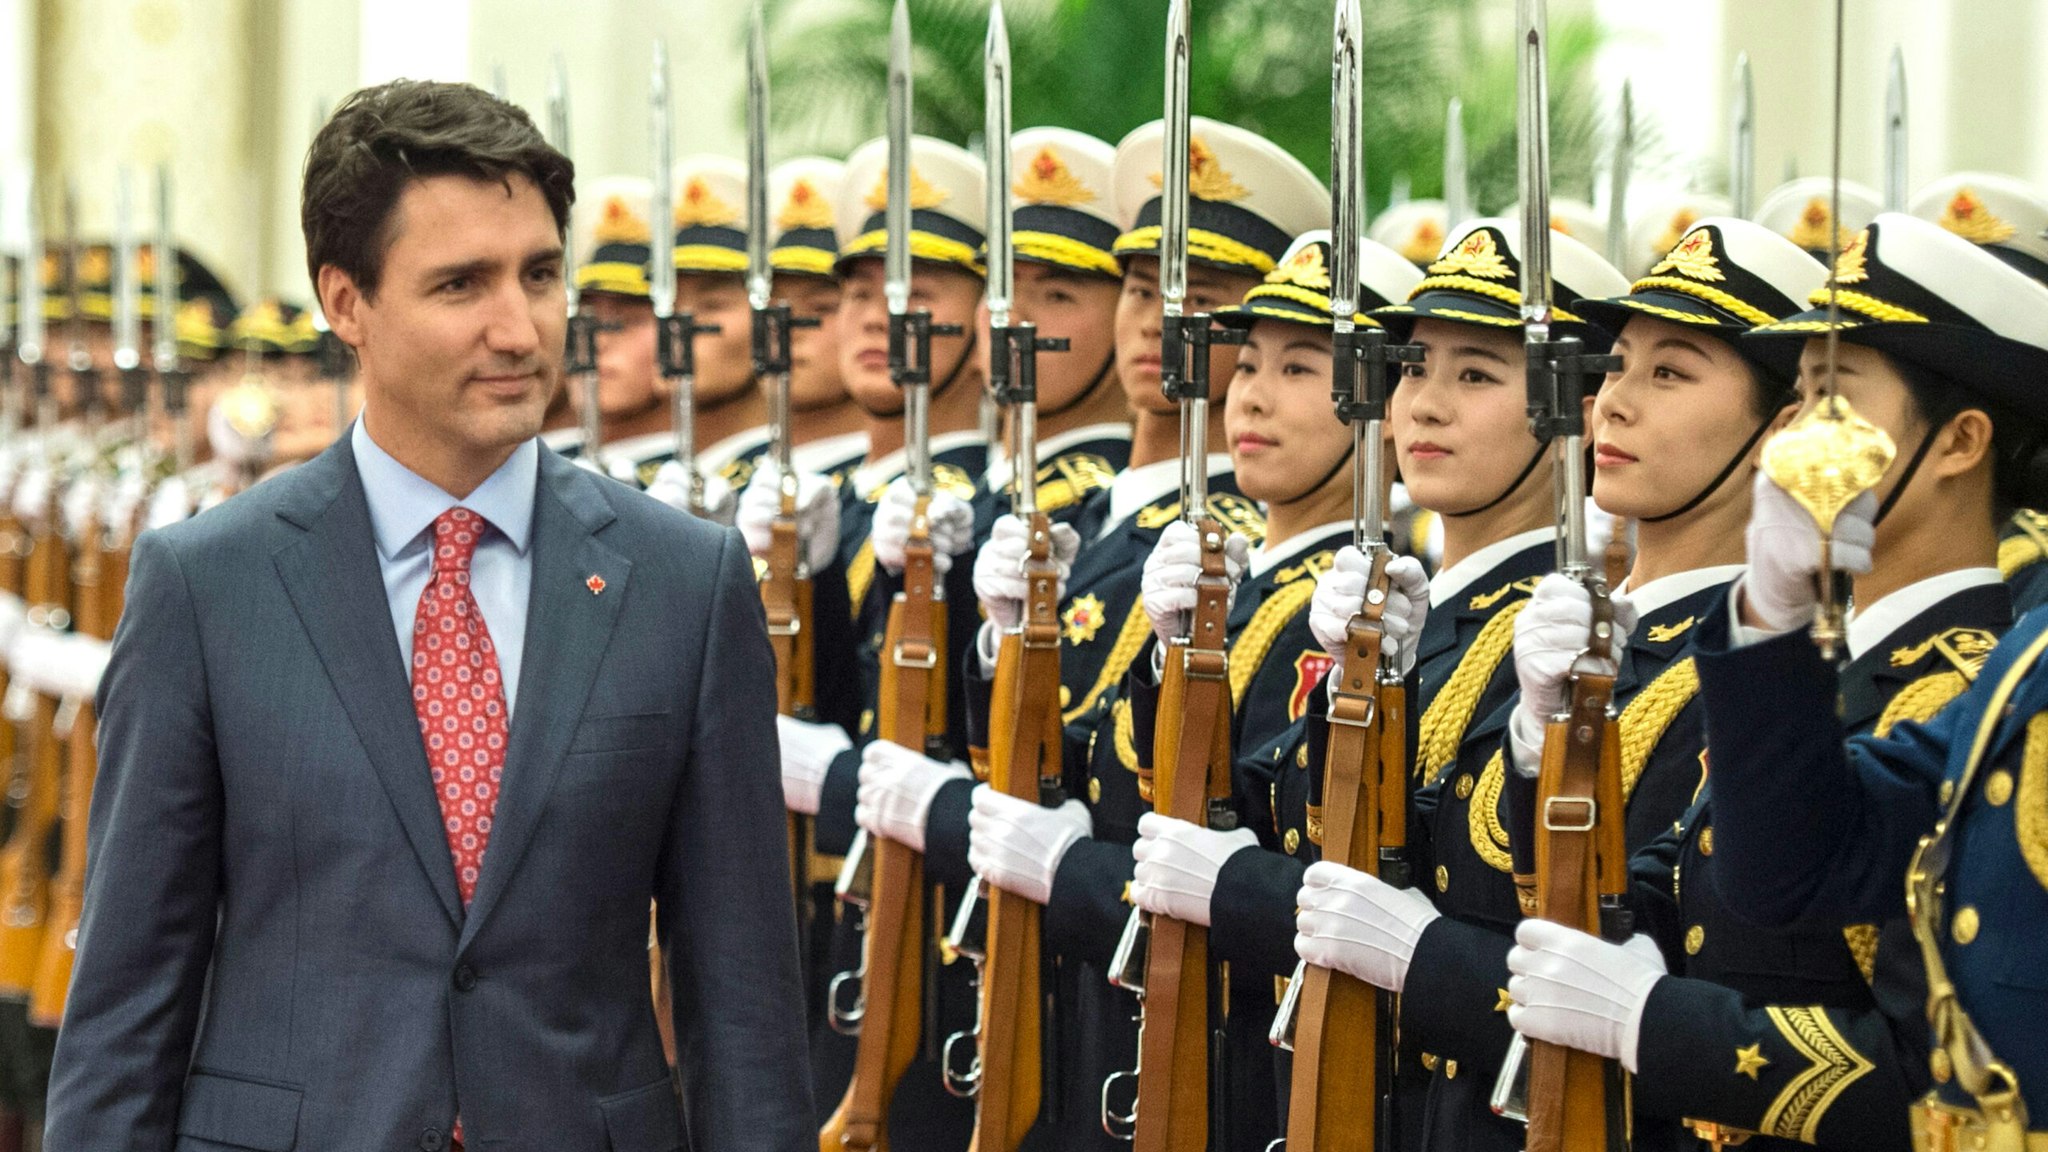 Canada's Prime Minister Justin Trudeau walks during a review of Chinese paramilitary guards with China's Premier Li Keqiang during a welcome ceremony at the Great Hall of the People in Beijing on December 4, 2017.